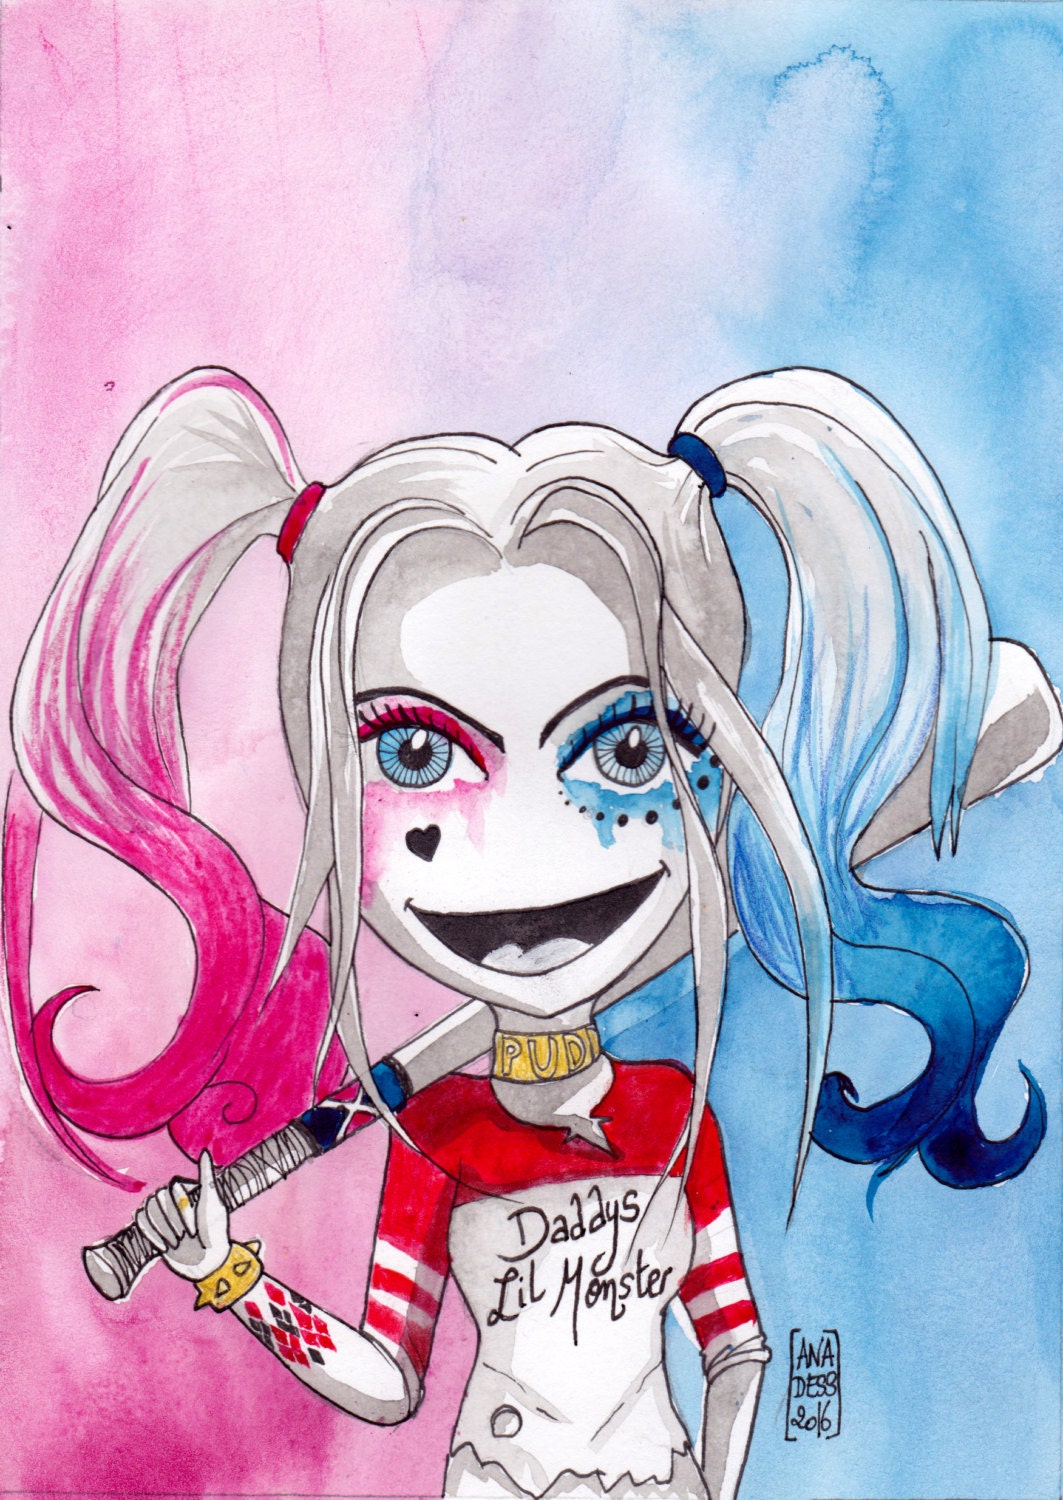 Ana Dess in Harley Quinn Suicide squad Original drawing